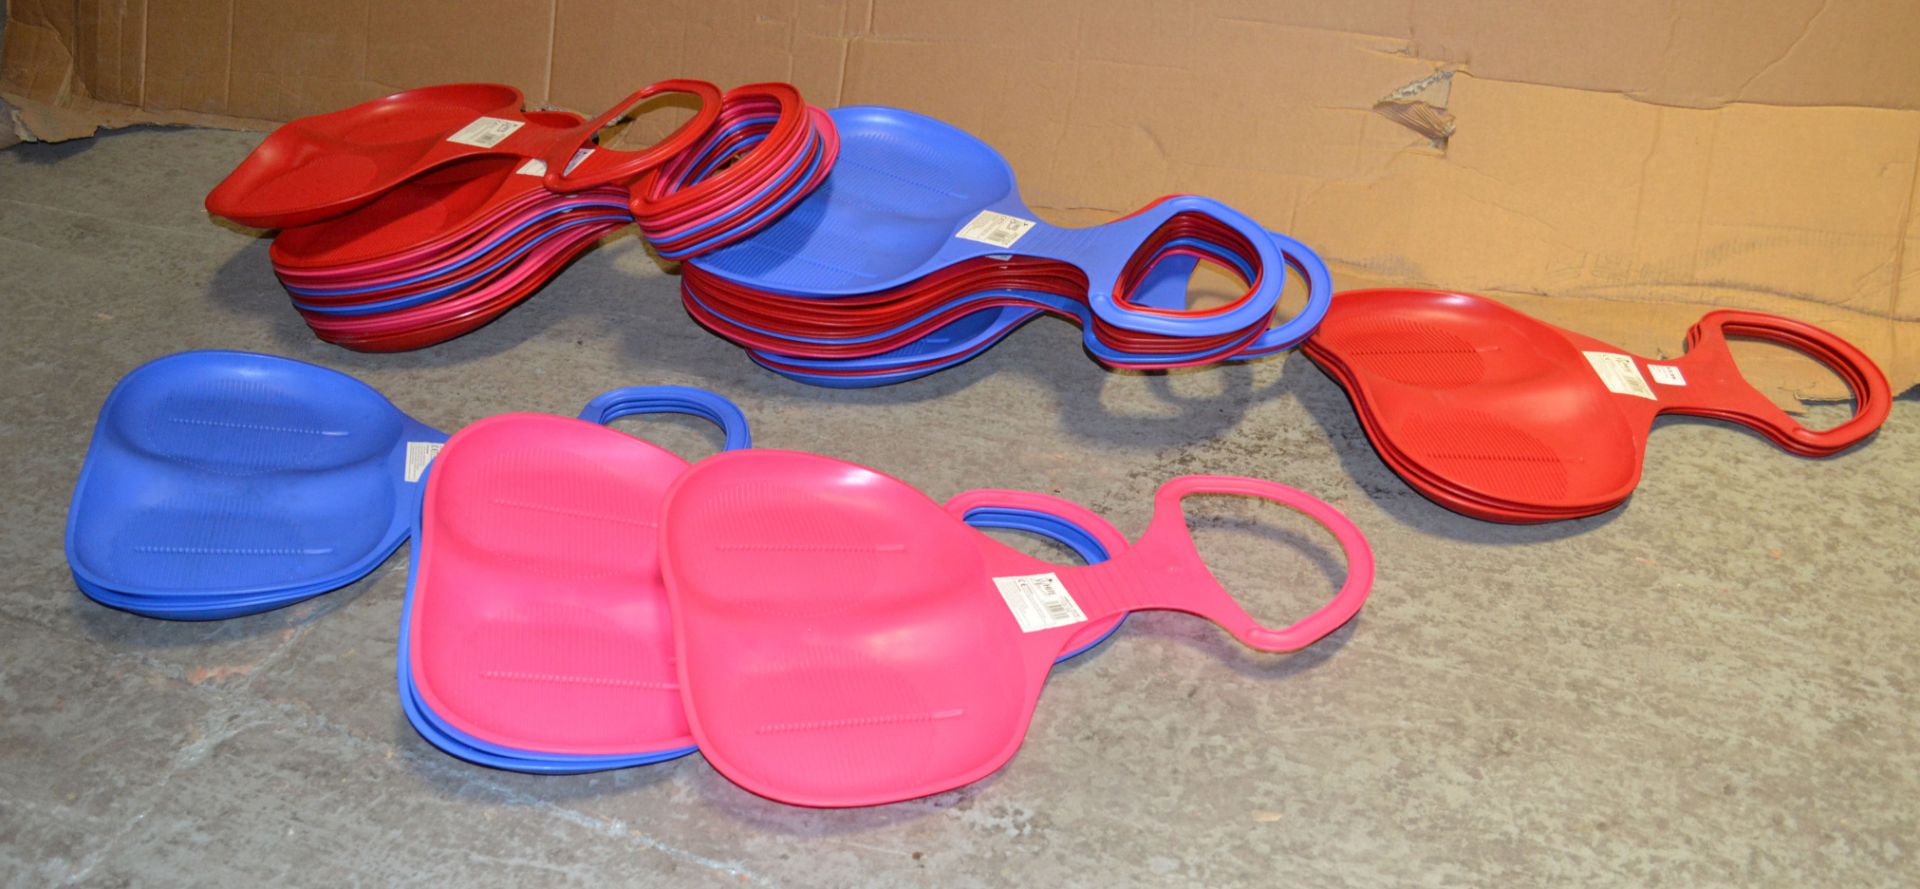 40 x Bum Skid Snow Sledges In Assorted Colours - CL262 - Location: Altrincham WA14 - Image 3 of 5